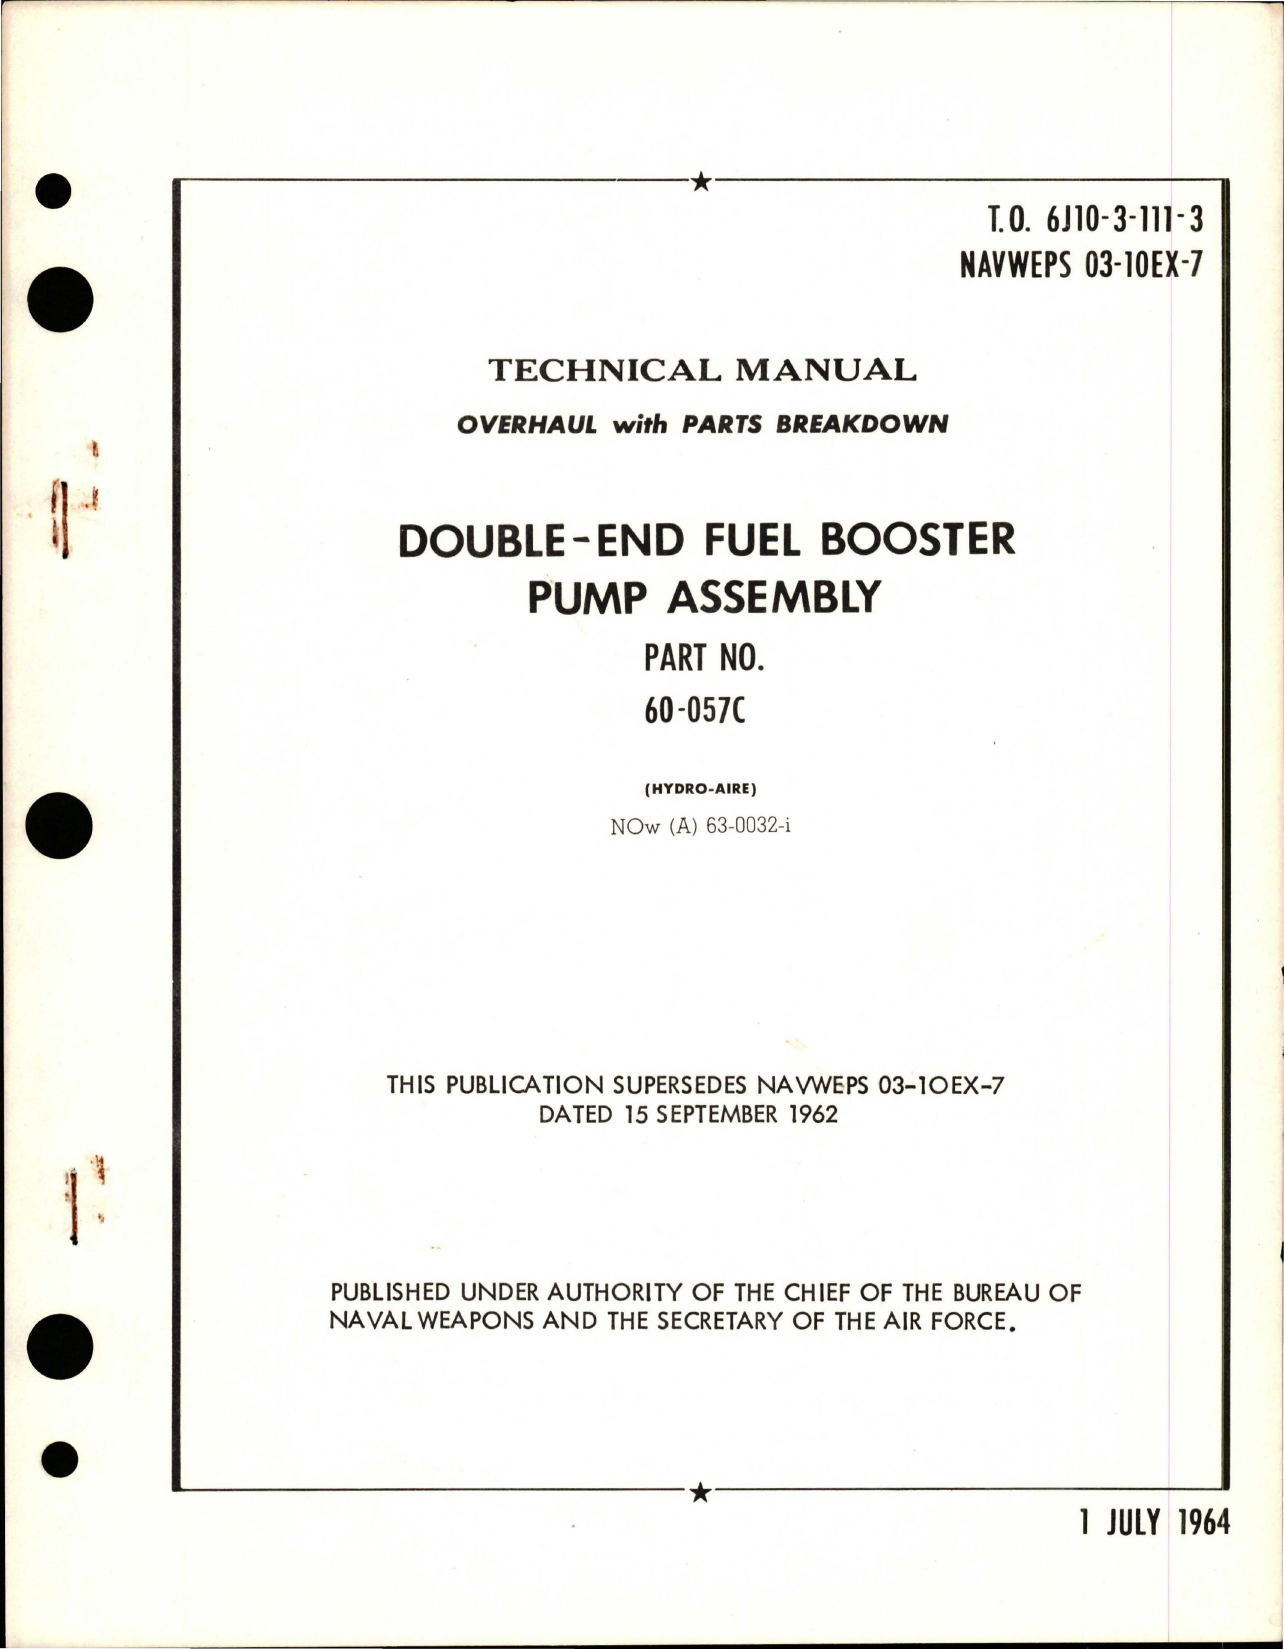 Sample page 1 from AirCorps Library document: Overhaul with Parts Breakdown for Double End Fuel Booster Pump Assembly - Part 60-057C